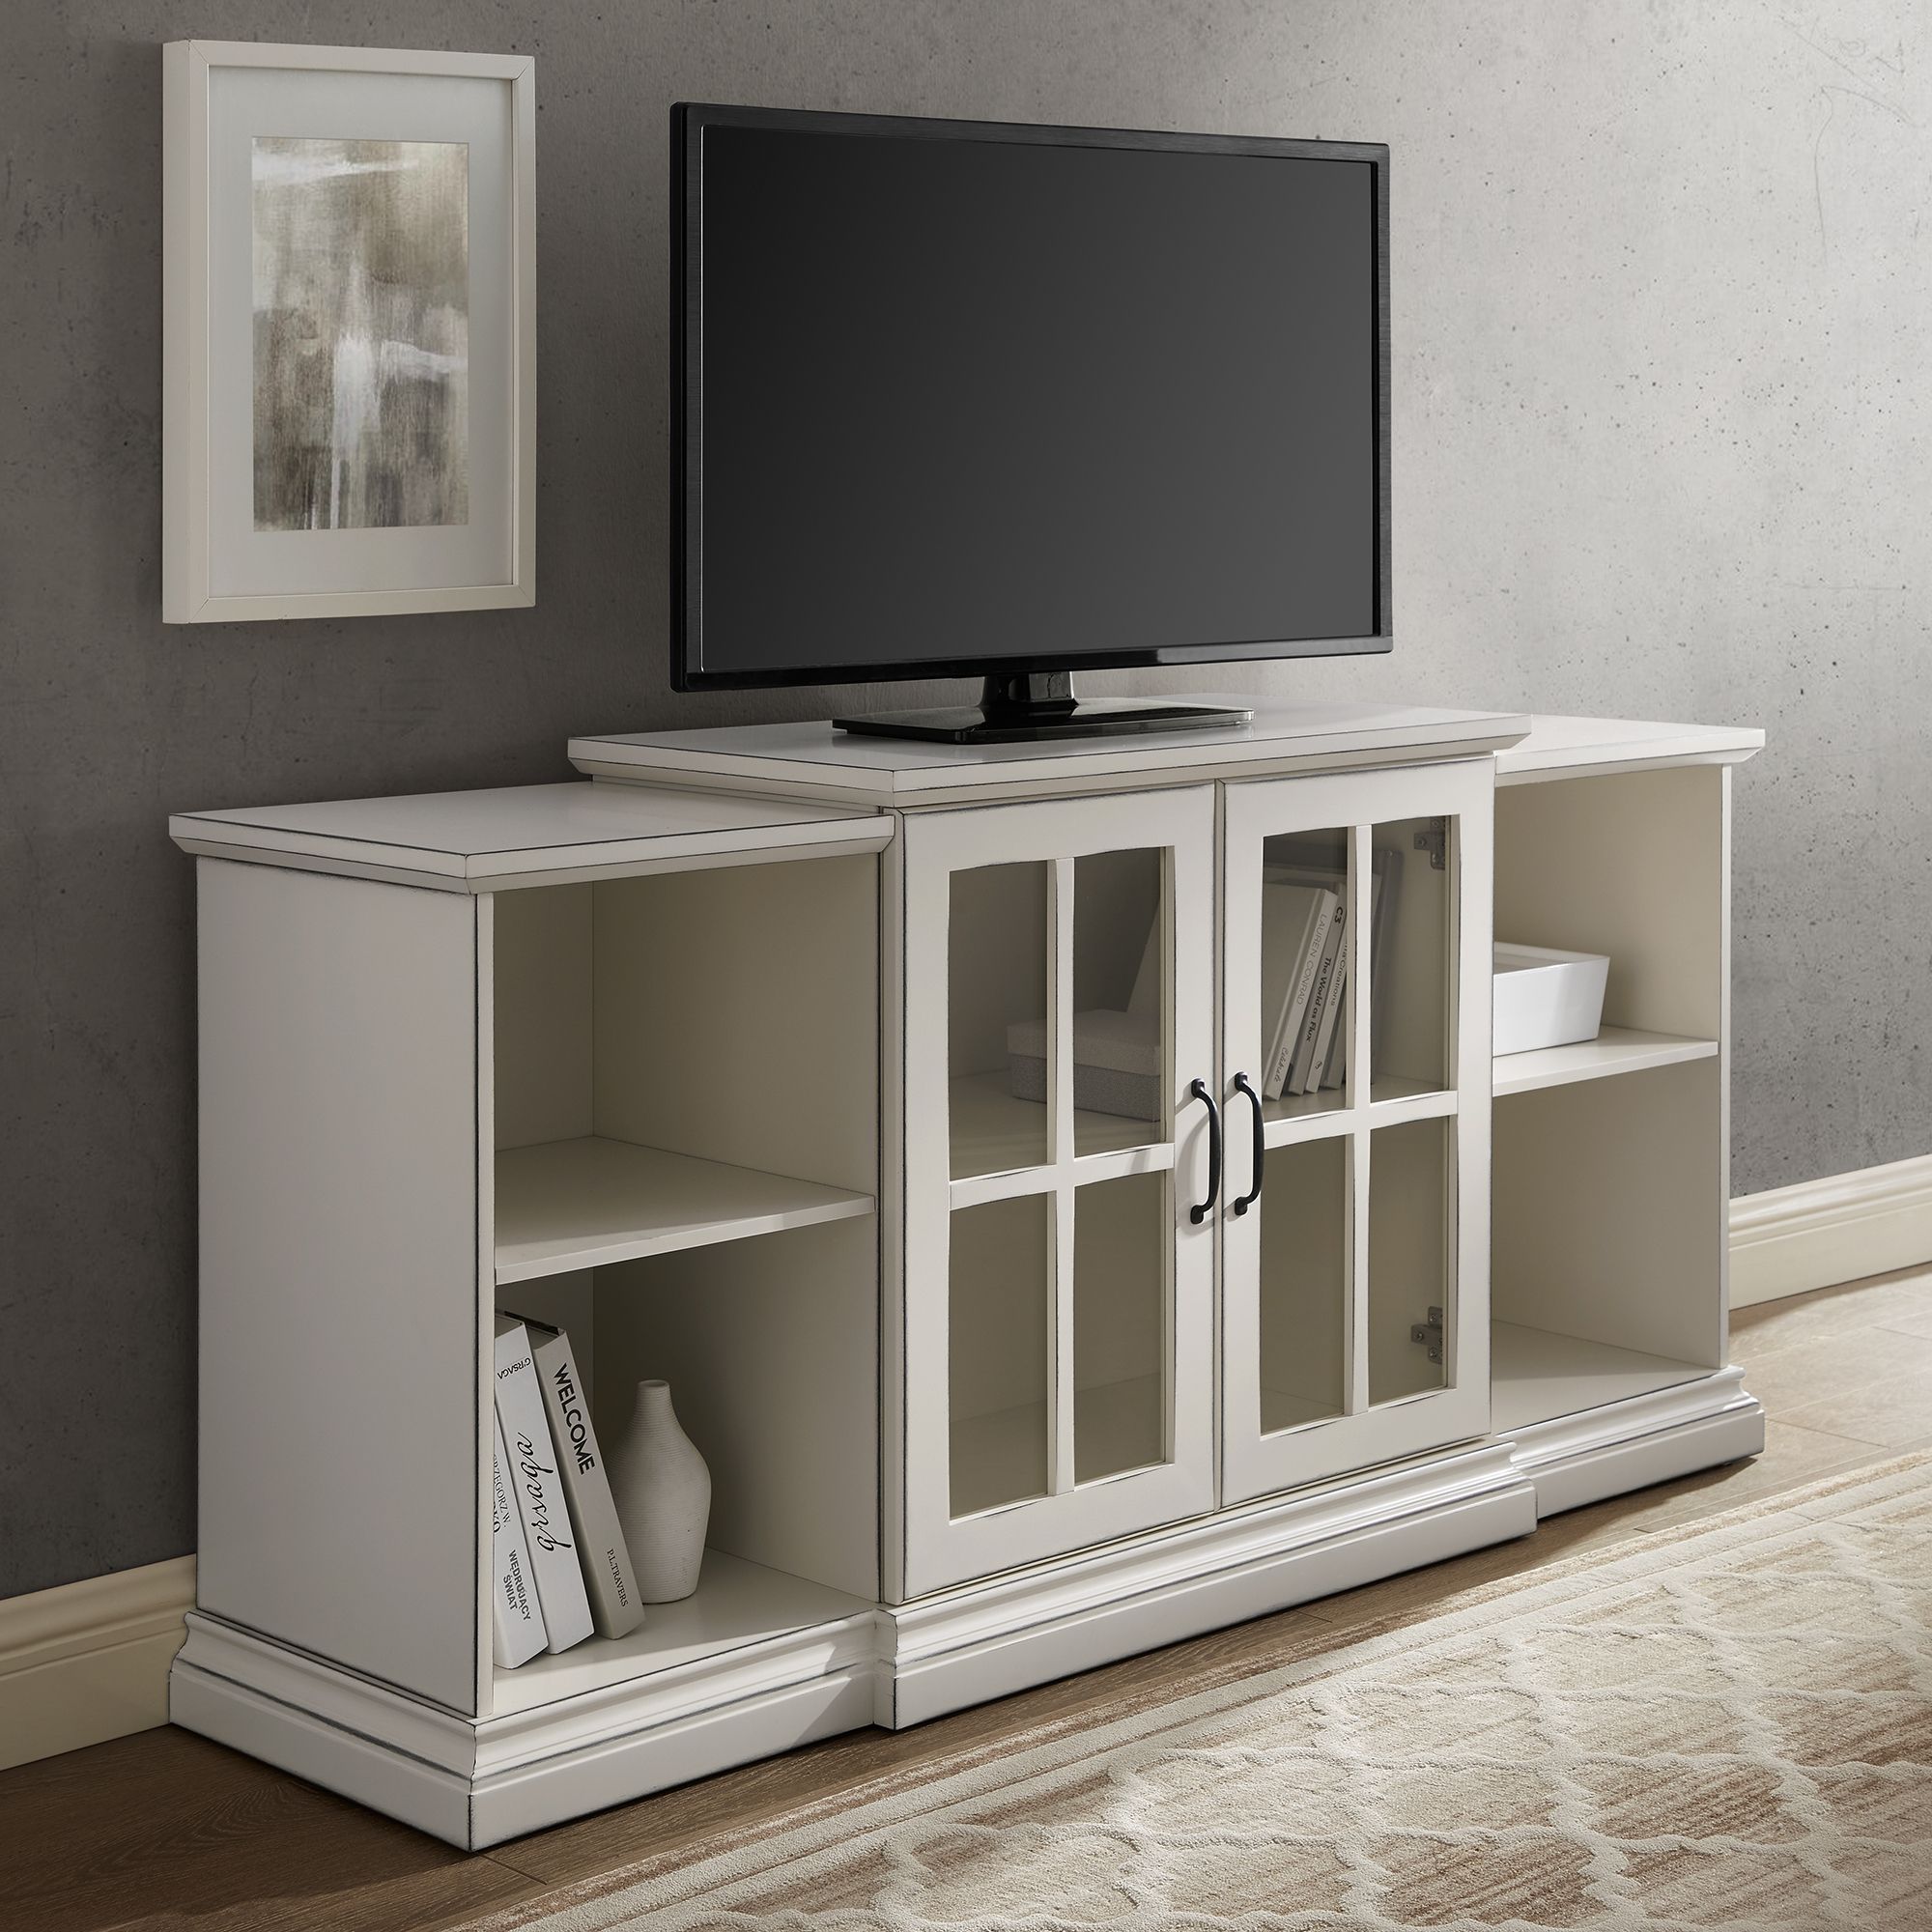 Manor Park Classic Tiered Tv Stand For Tvs Up To 65 Intended For Classic Tv Stands (Photo 1 of 15)